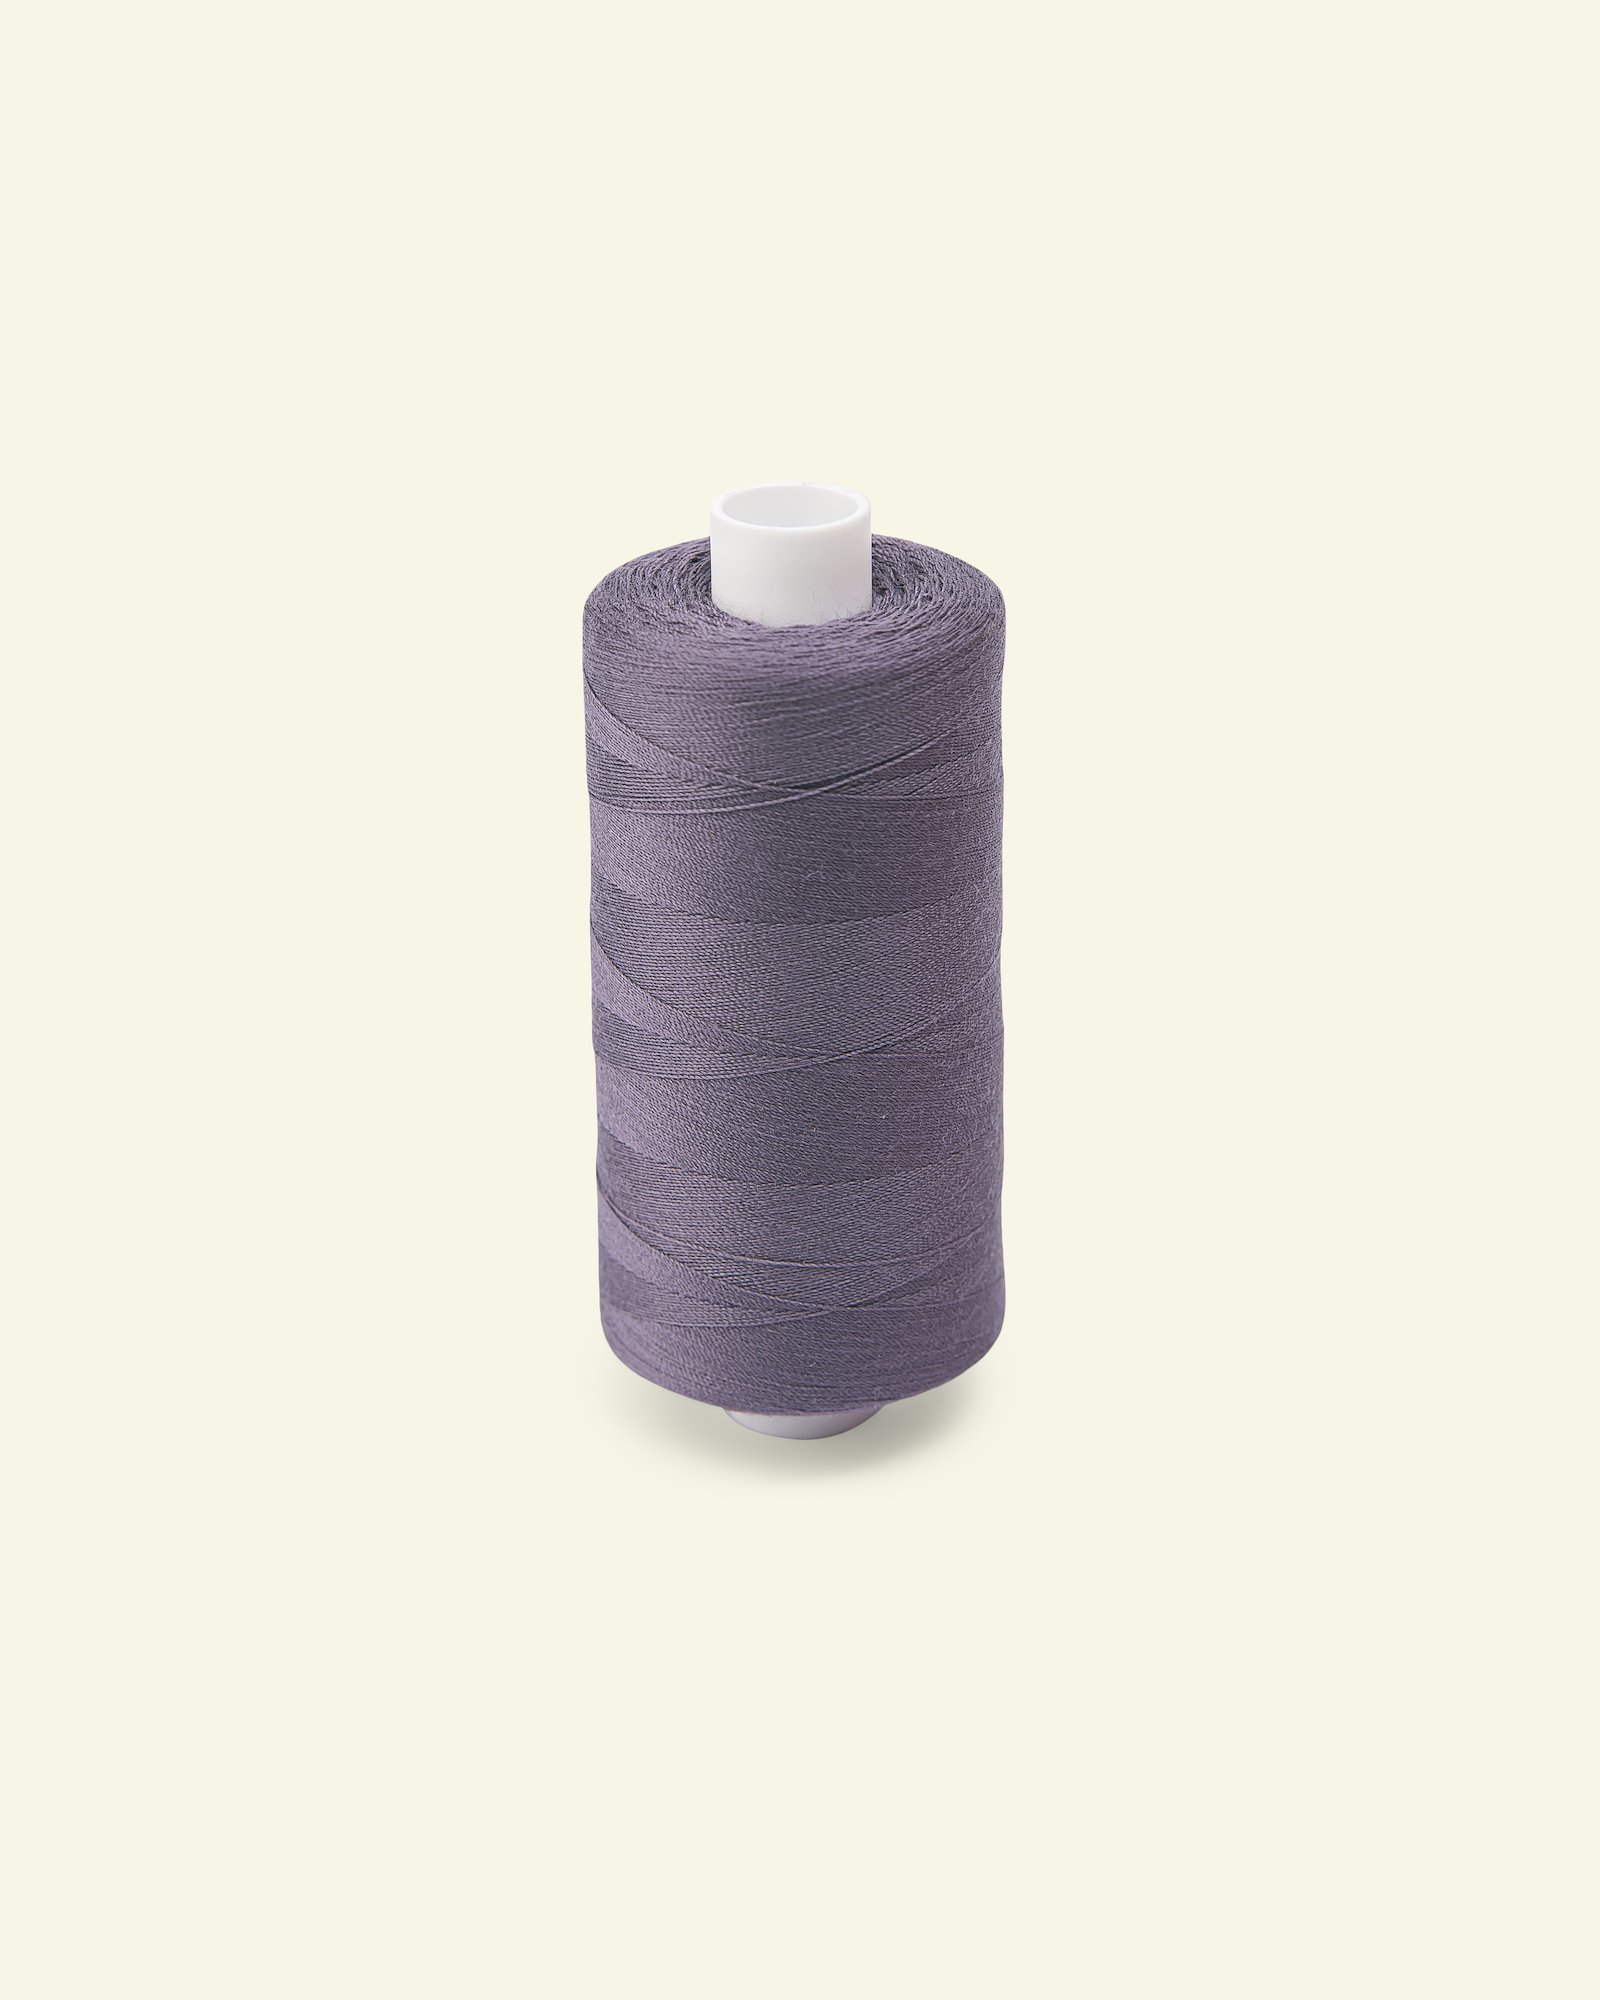 Sewing thread dusty lavender 1000m 12089_pack